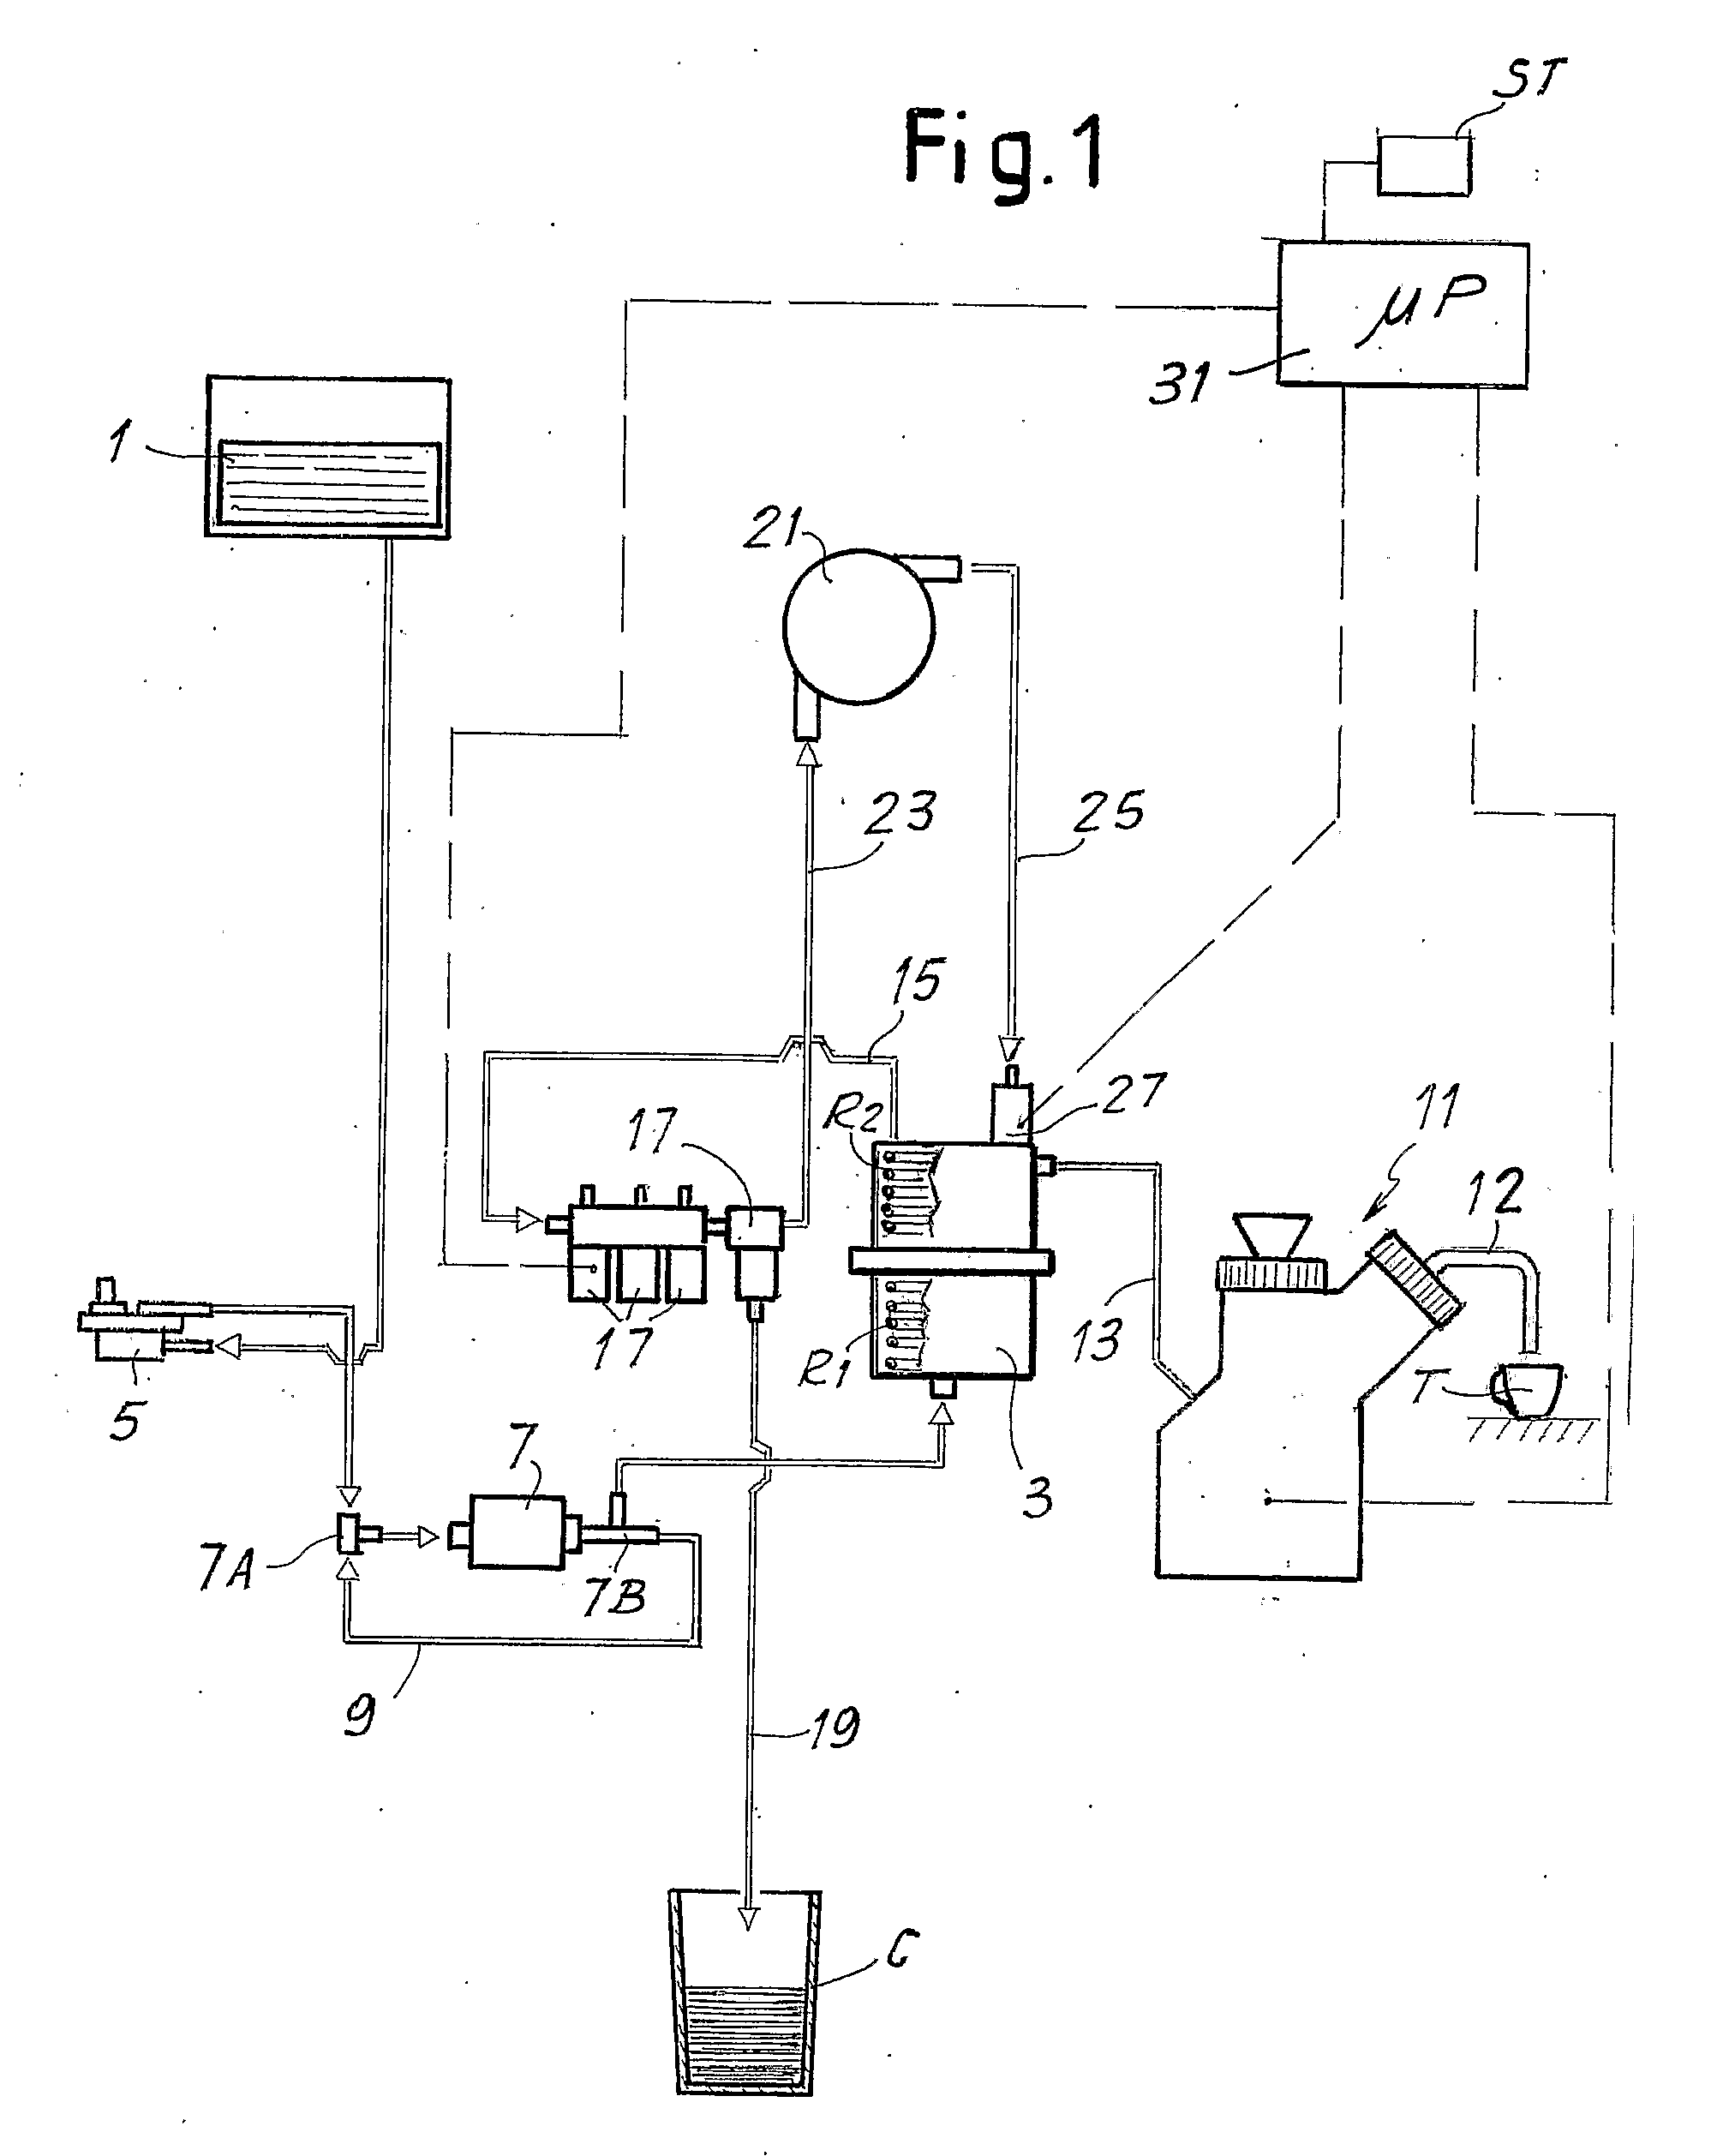 Machine to produce coffee or the like and relative method